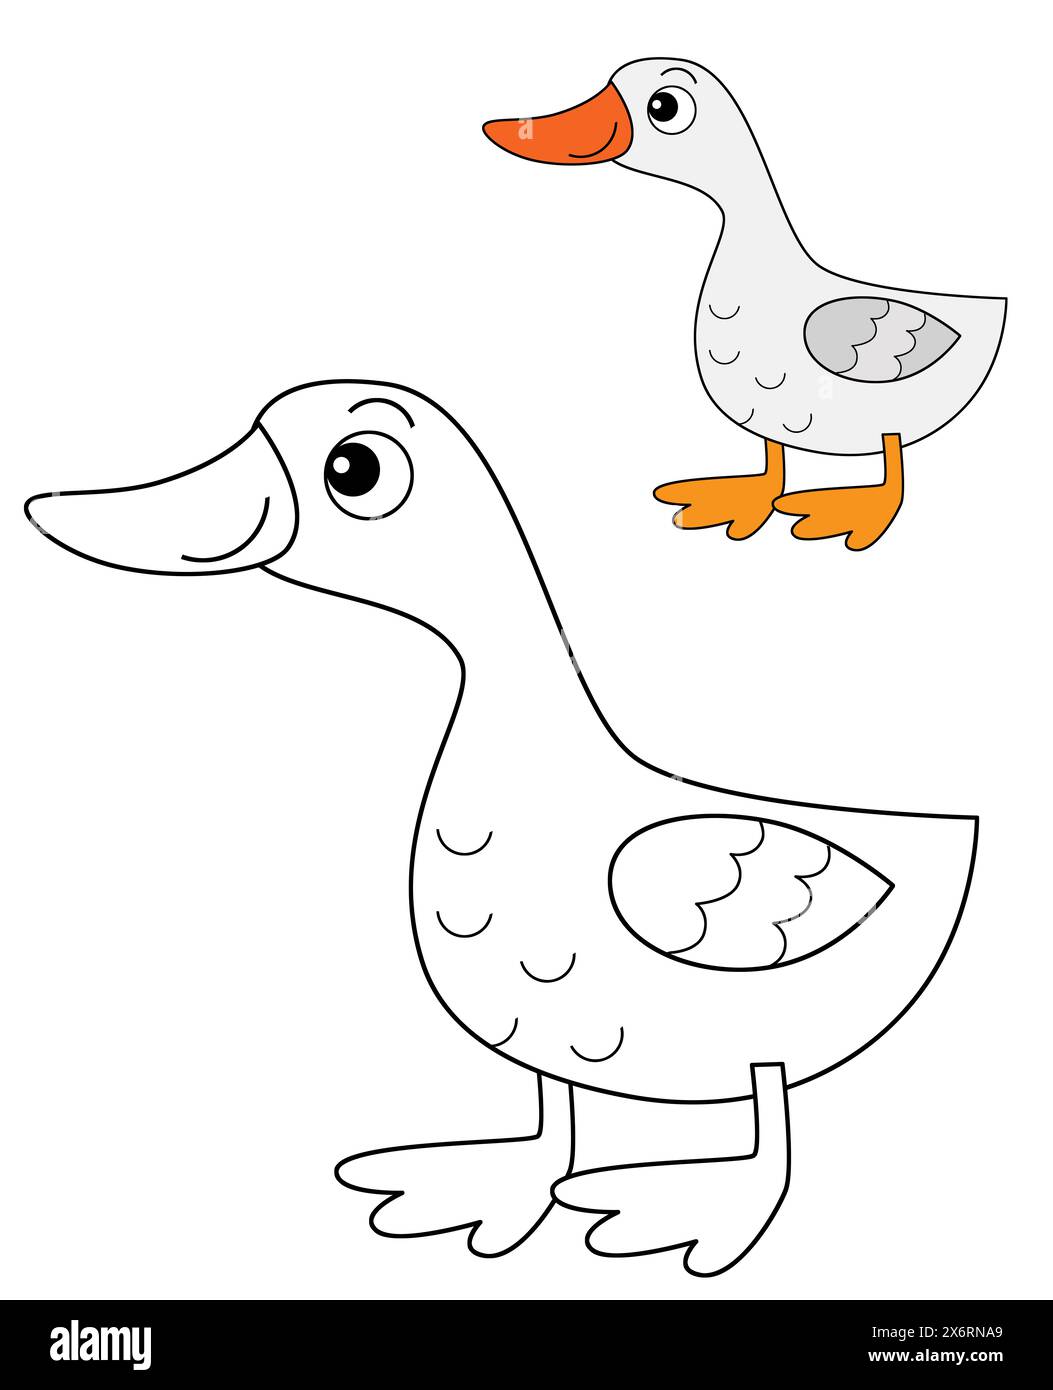 Cartoon happy farm animal cheerful goose bird running isolated background with sketch drawing with colorful preview illustration for kids Stock Photo